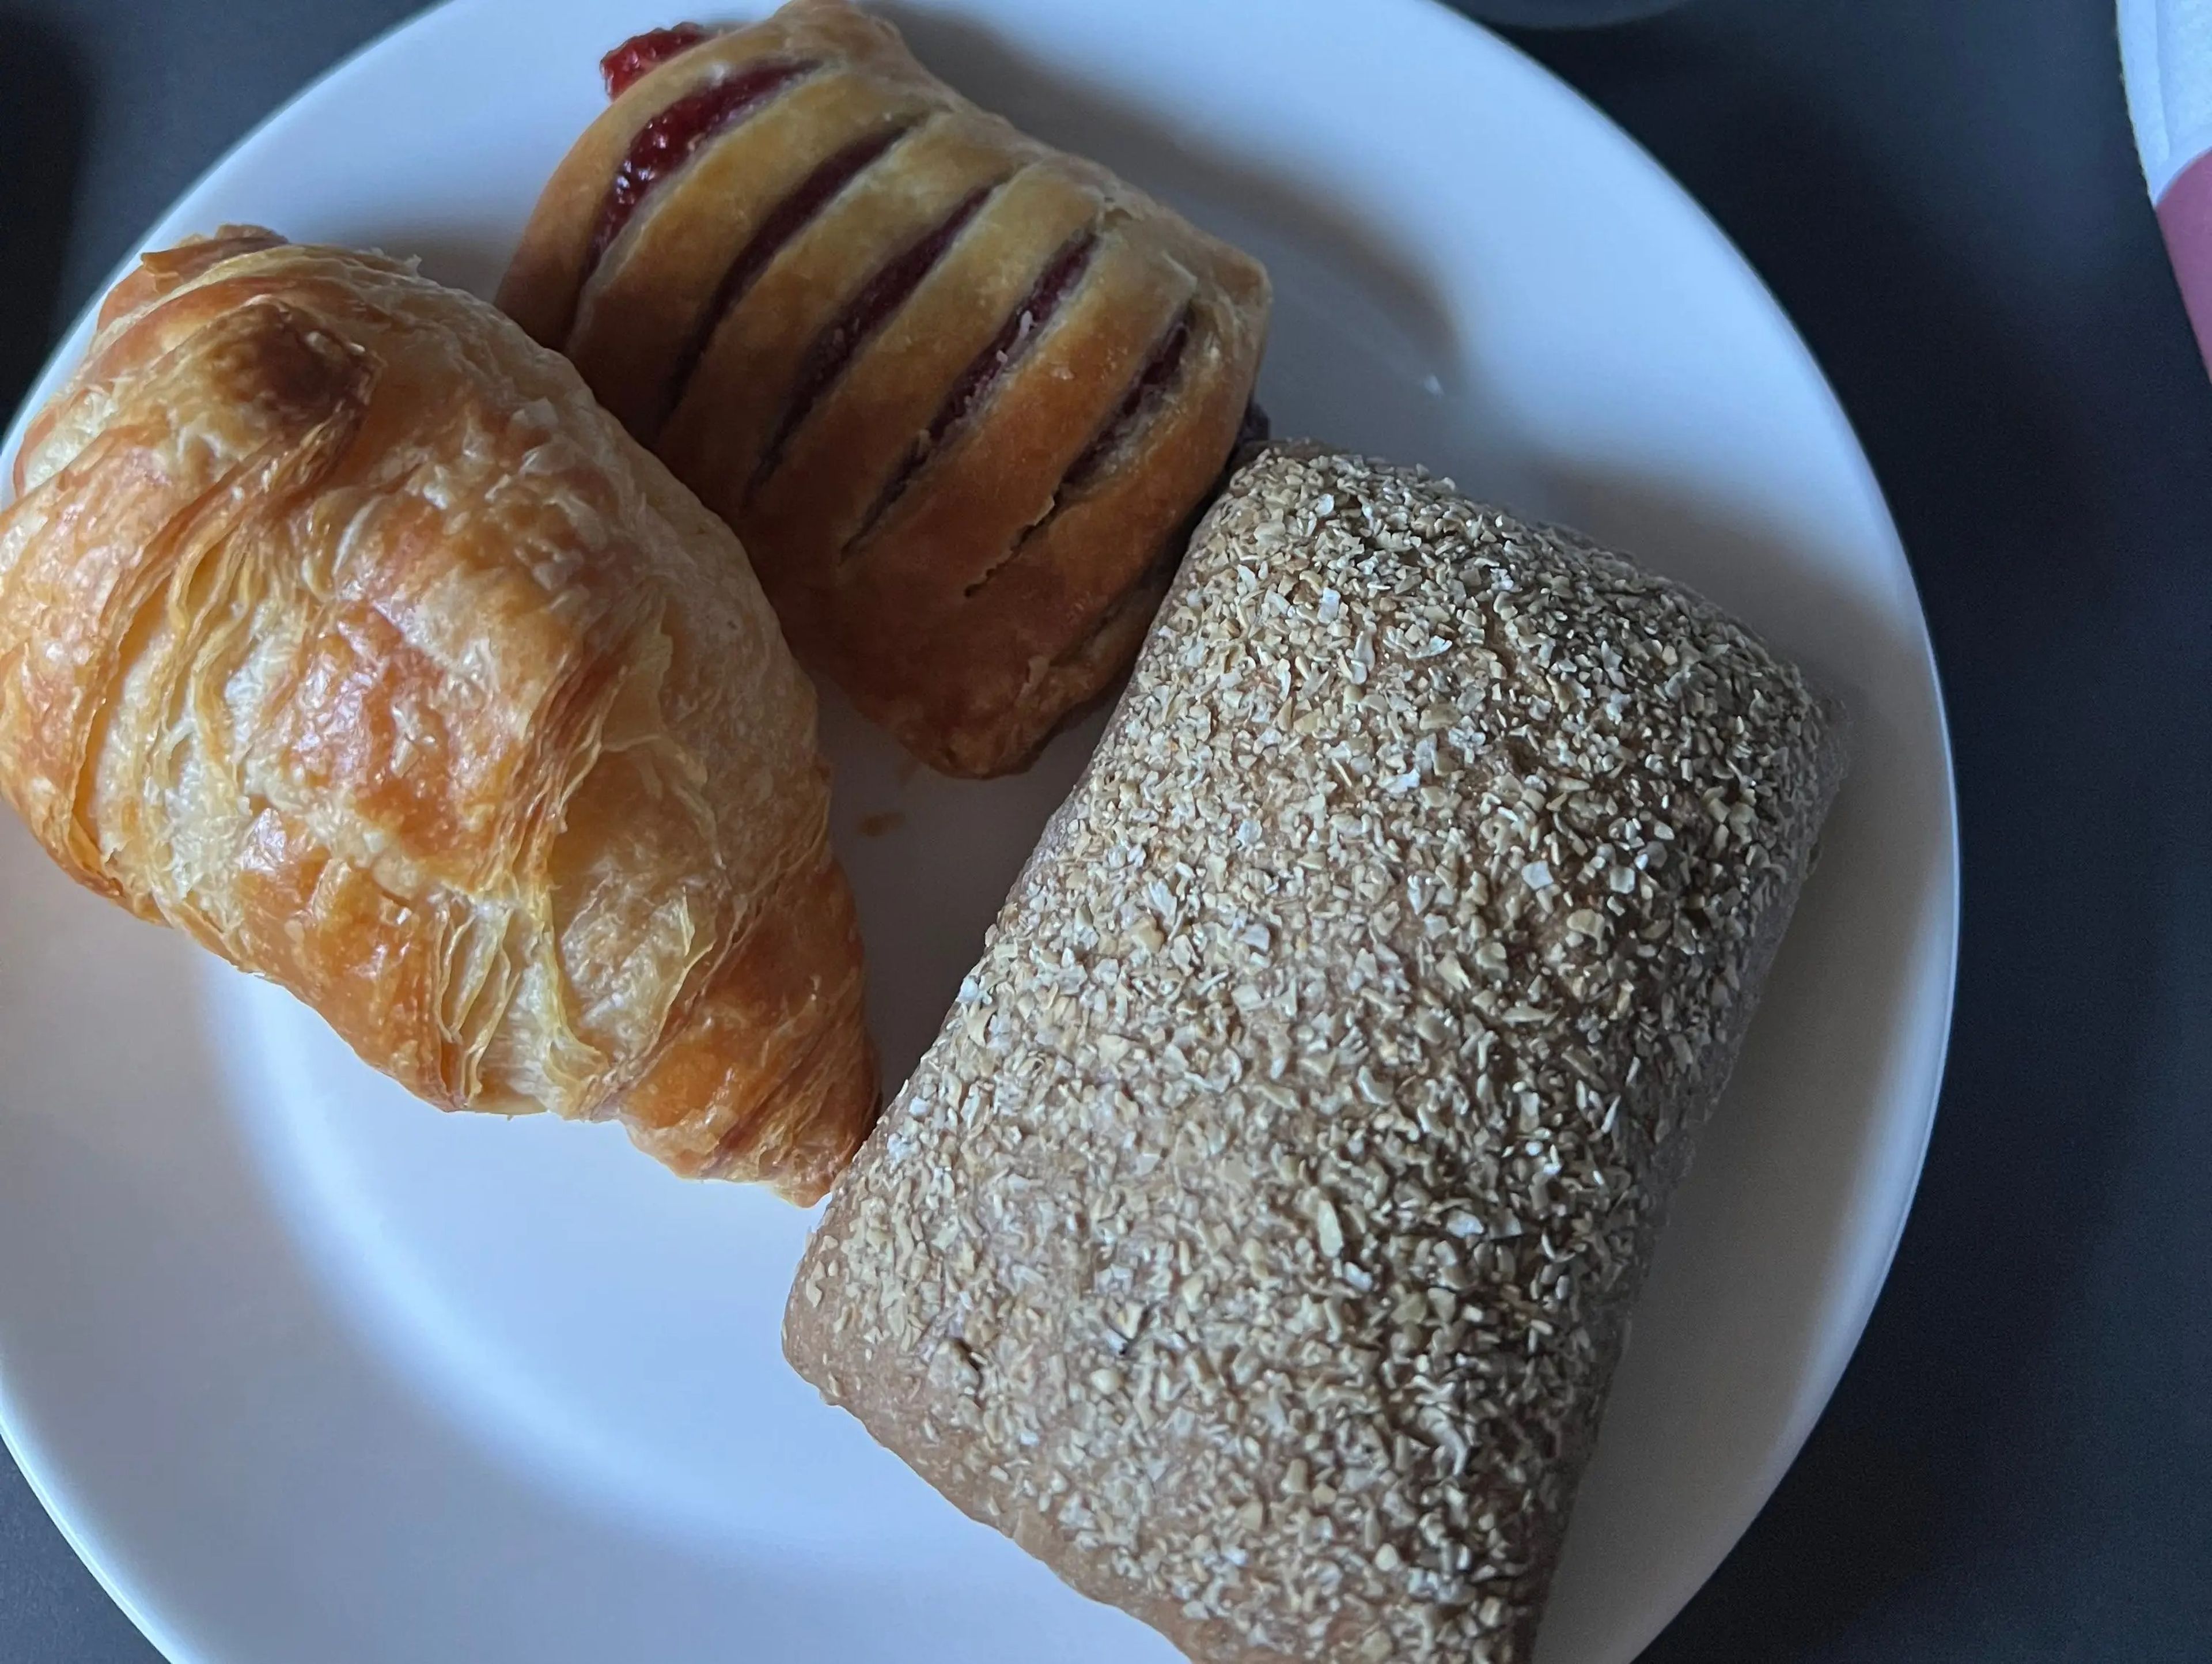 a plate with three pastries on it on the plane